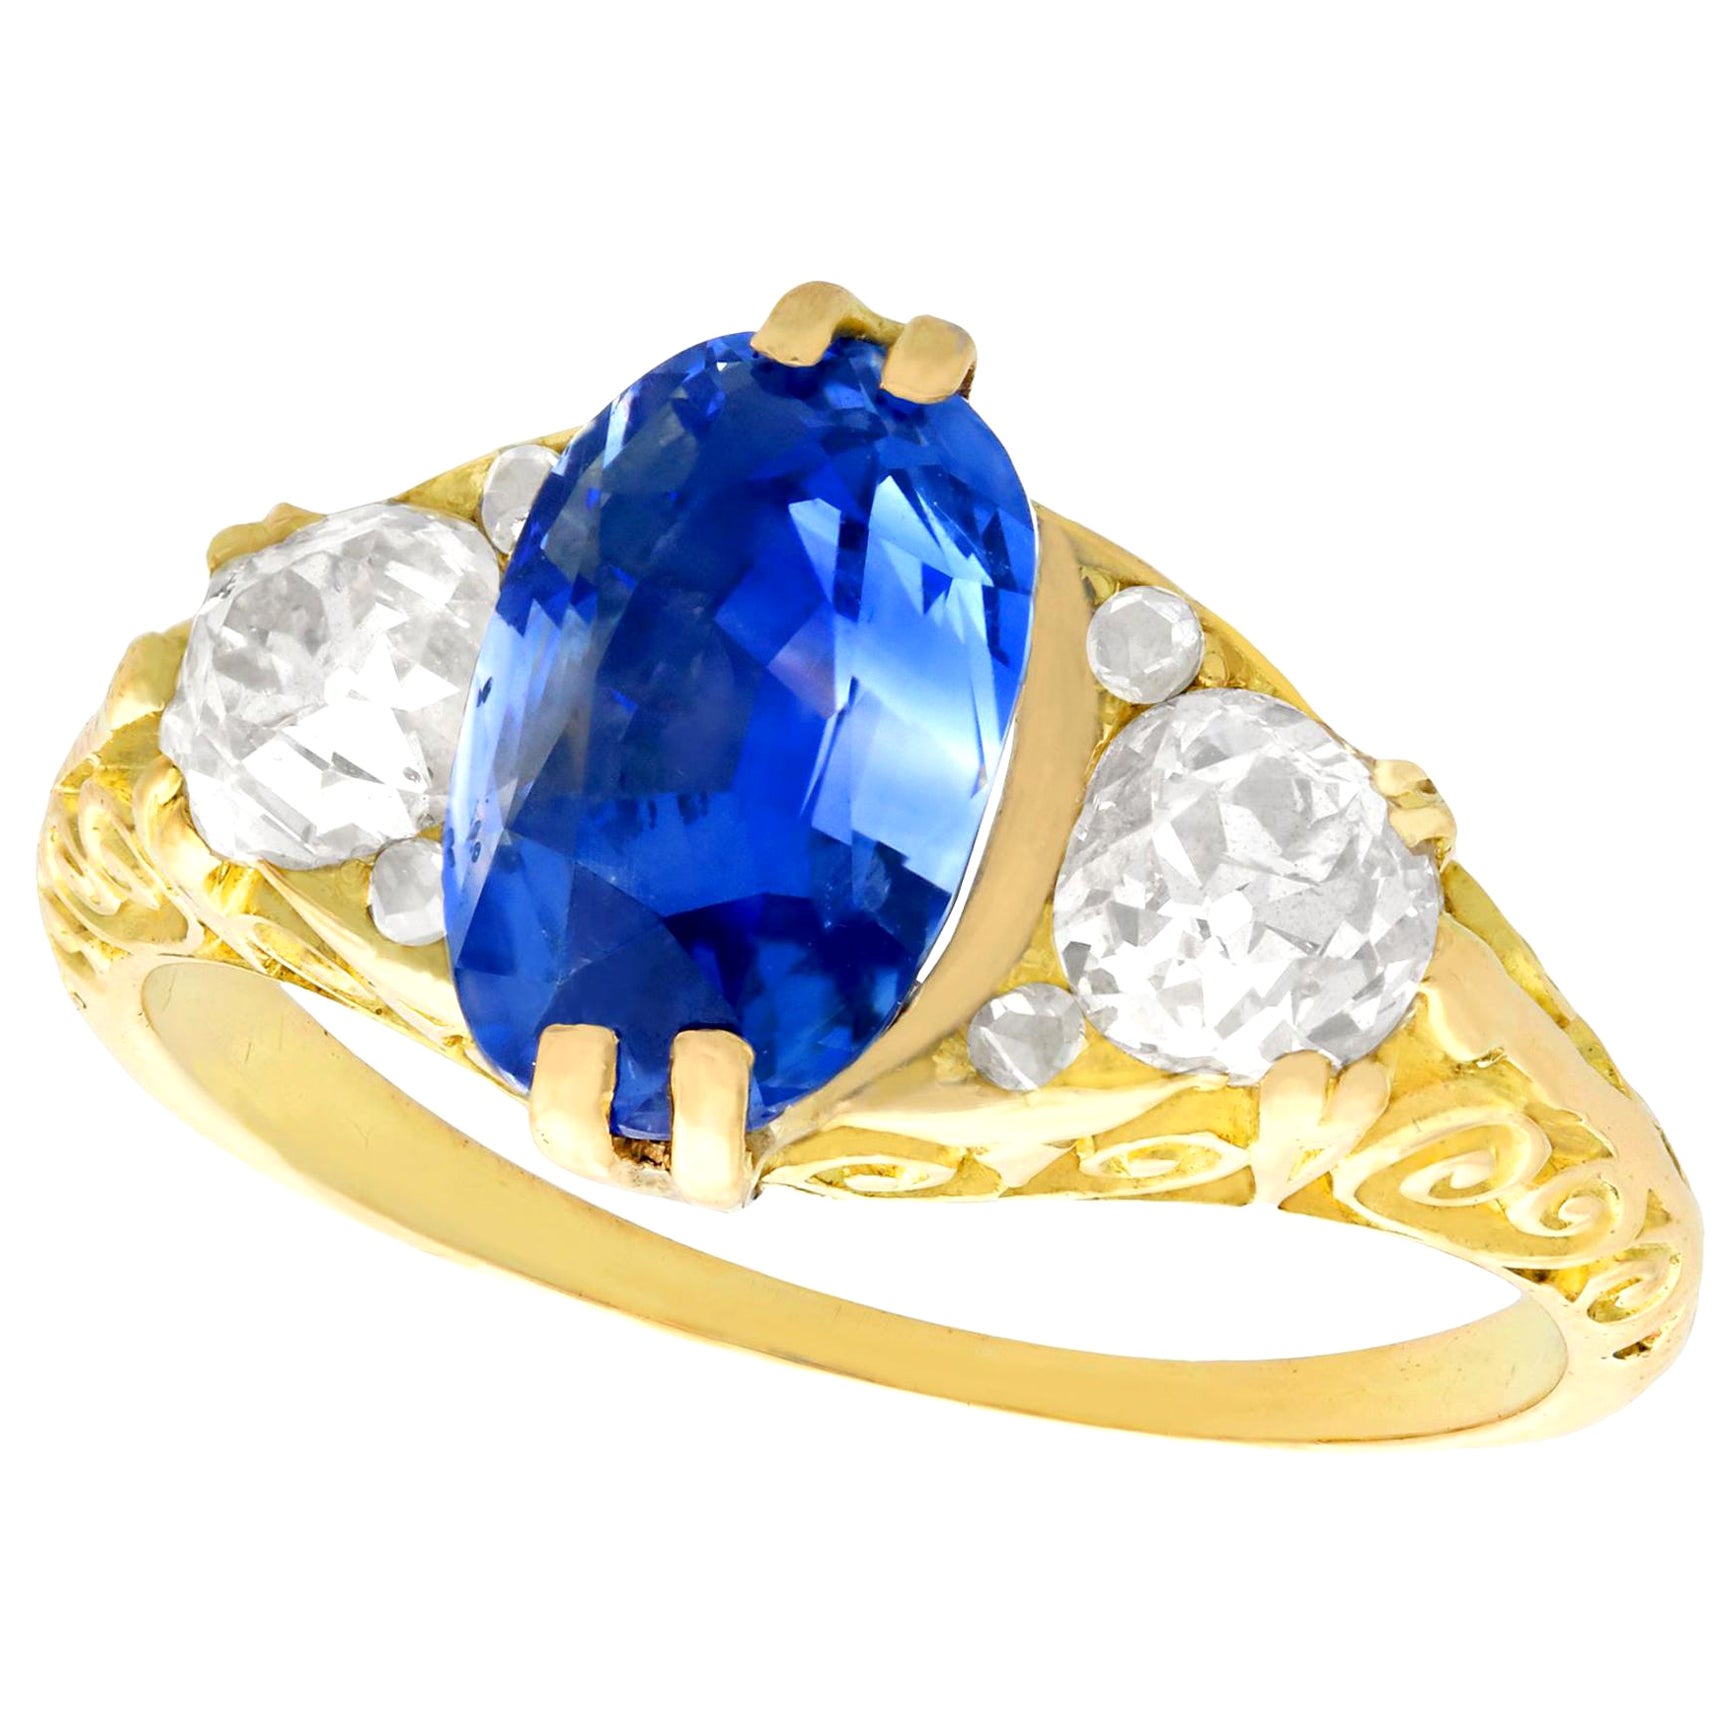 Antique Victorian 1890s 3.11 Carat Sapphire Diamond Yellow Gold Trilogy Ring For Sale